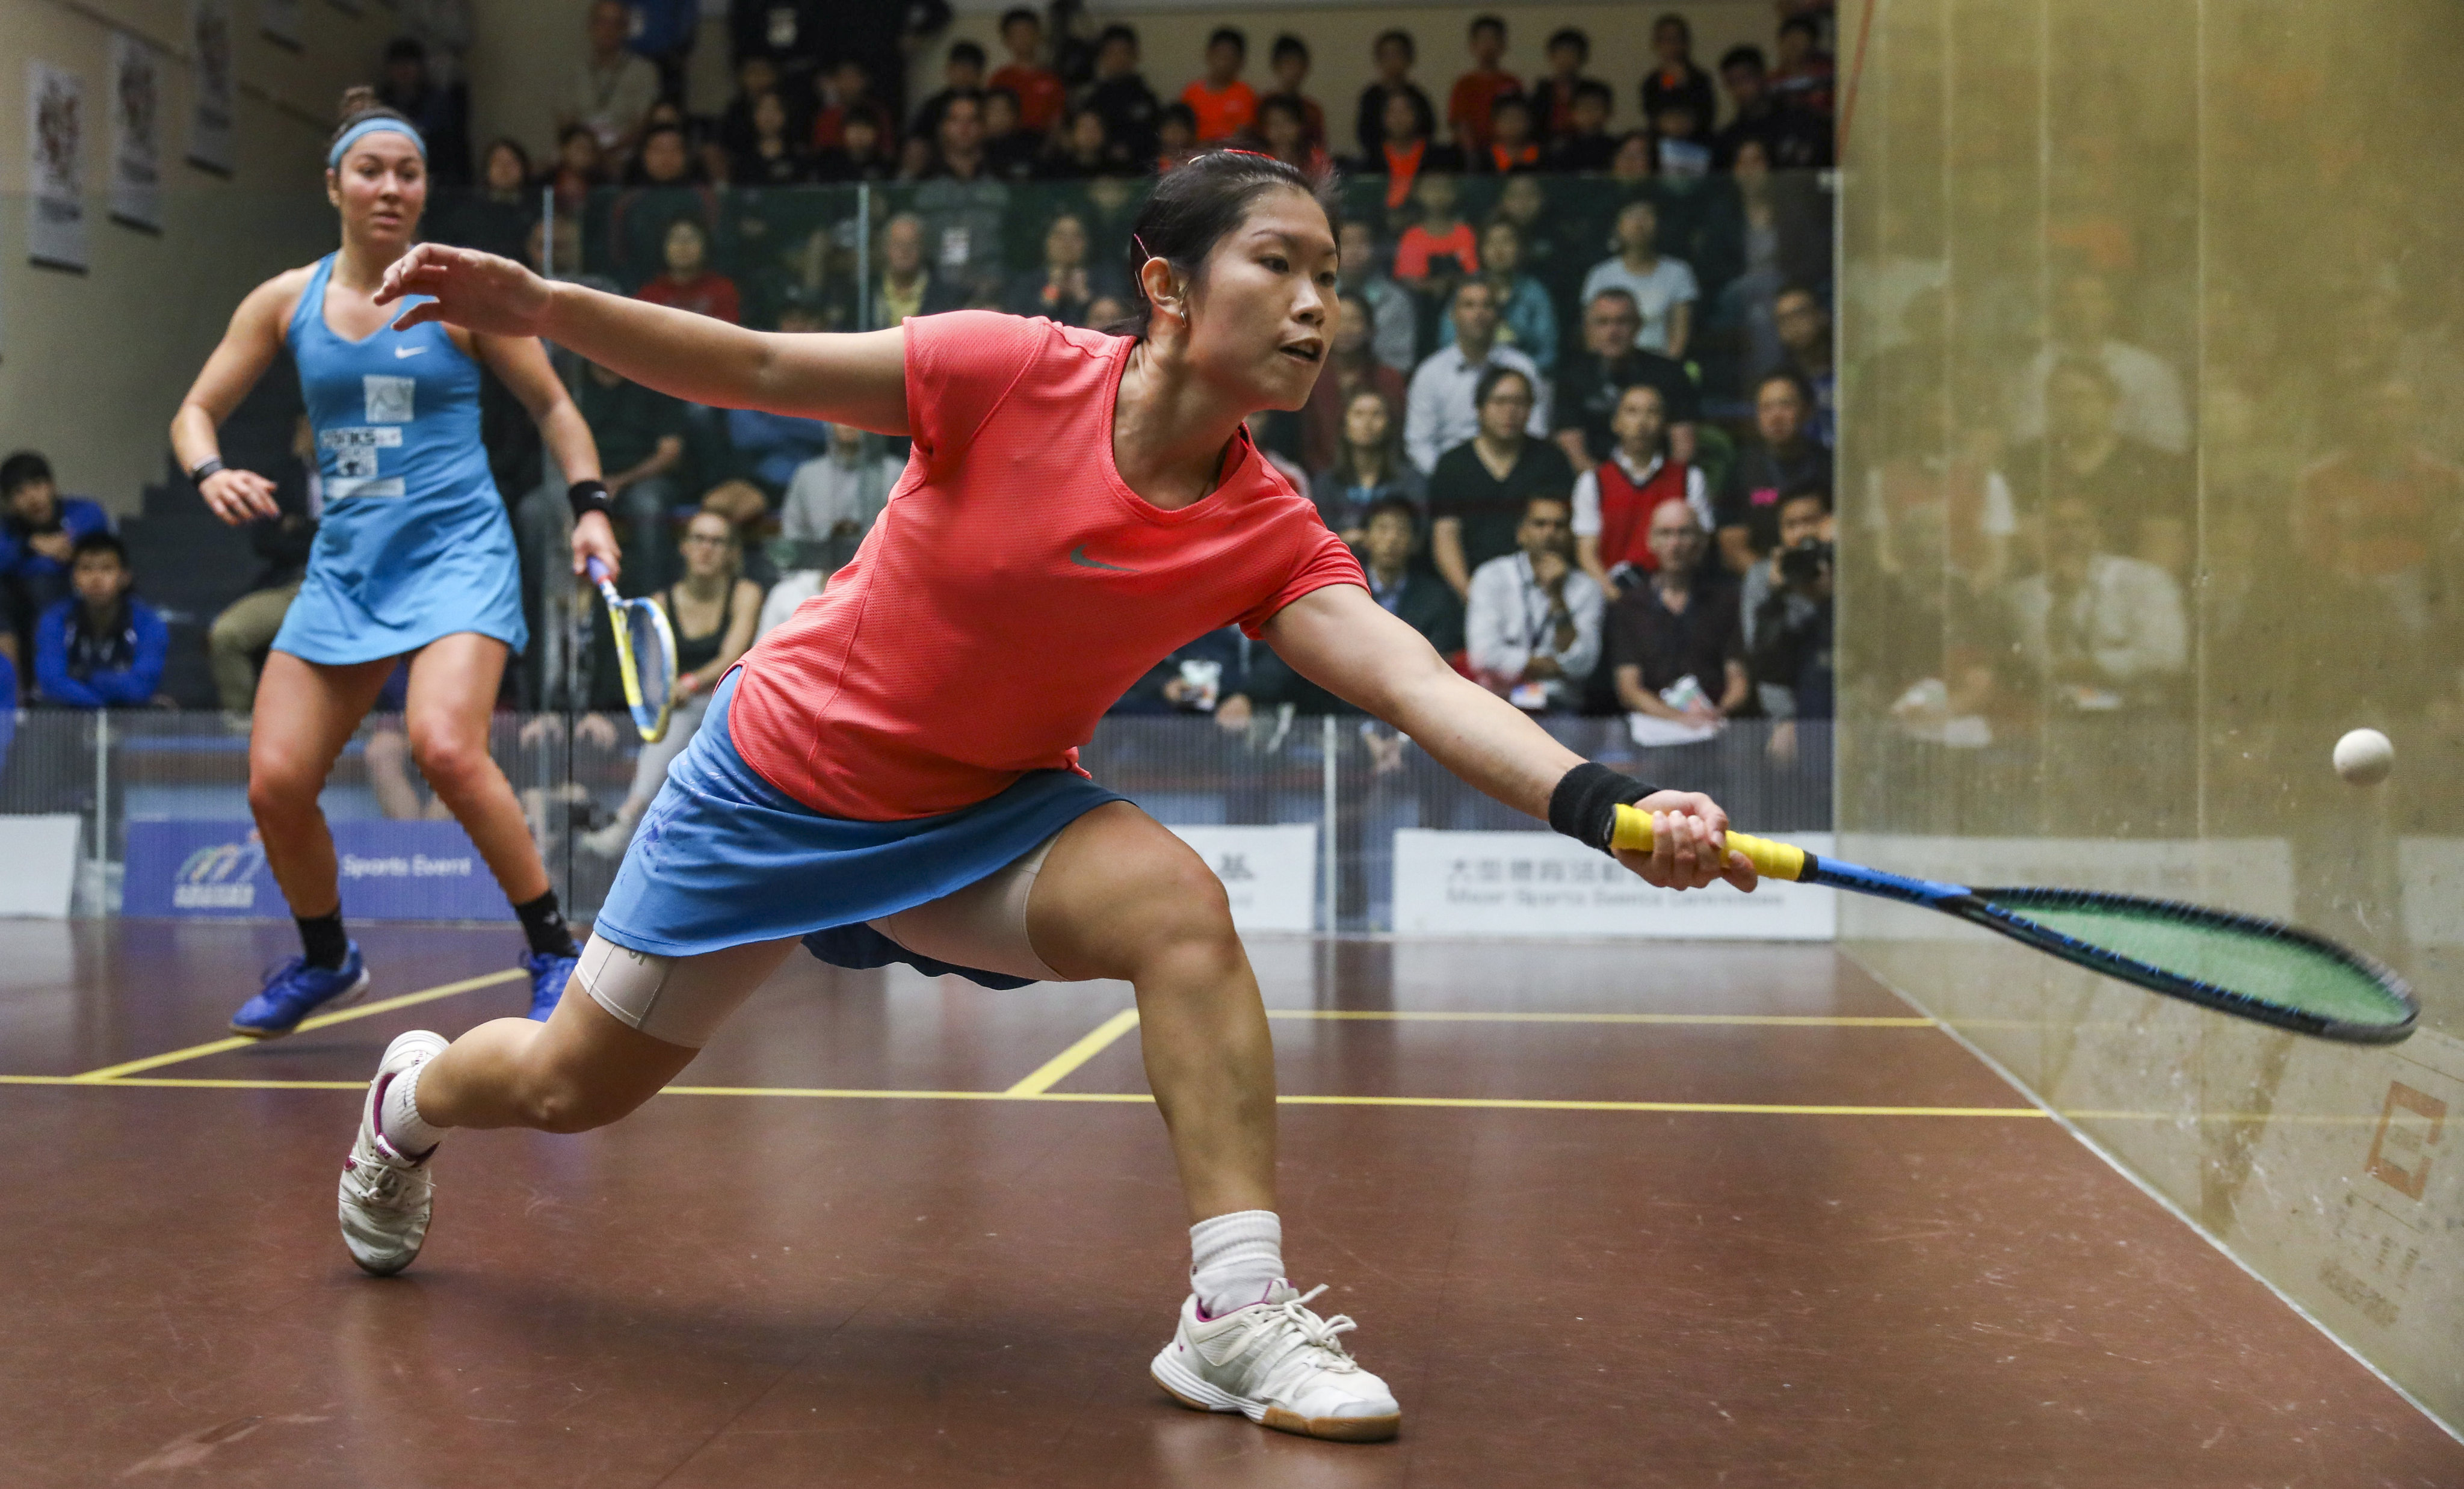 Hong Kong’s Au Wing-chi in action against Amanda Sobhy of United States at the 2018 Sun Hung Kai Hong Kong Open at the Squash Centre in Central. The tournament has been cancelled for the last three years but will return in November. Photo: Dickson Lee